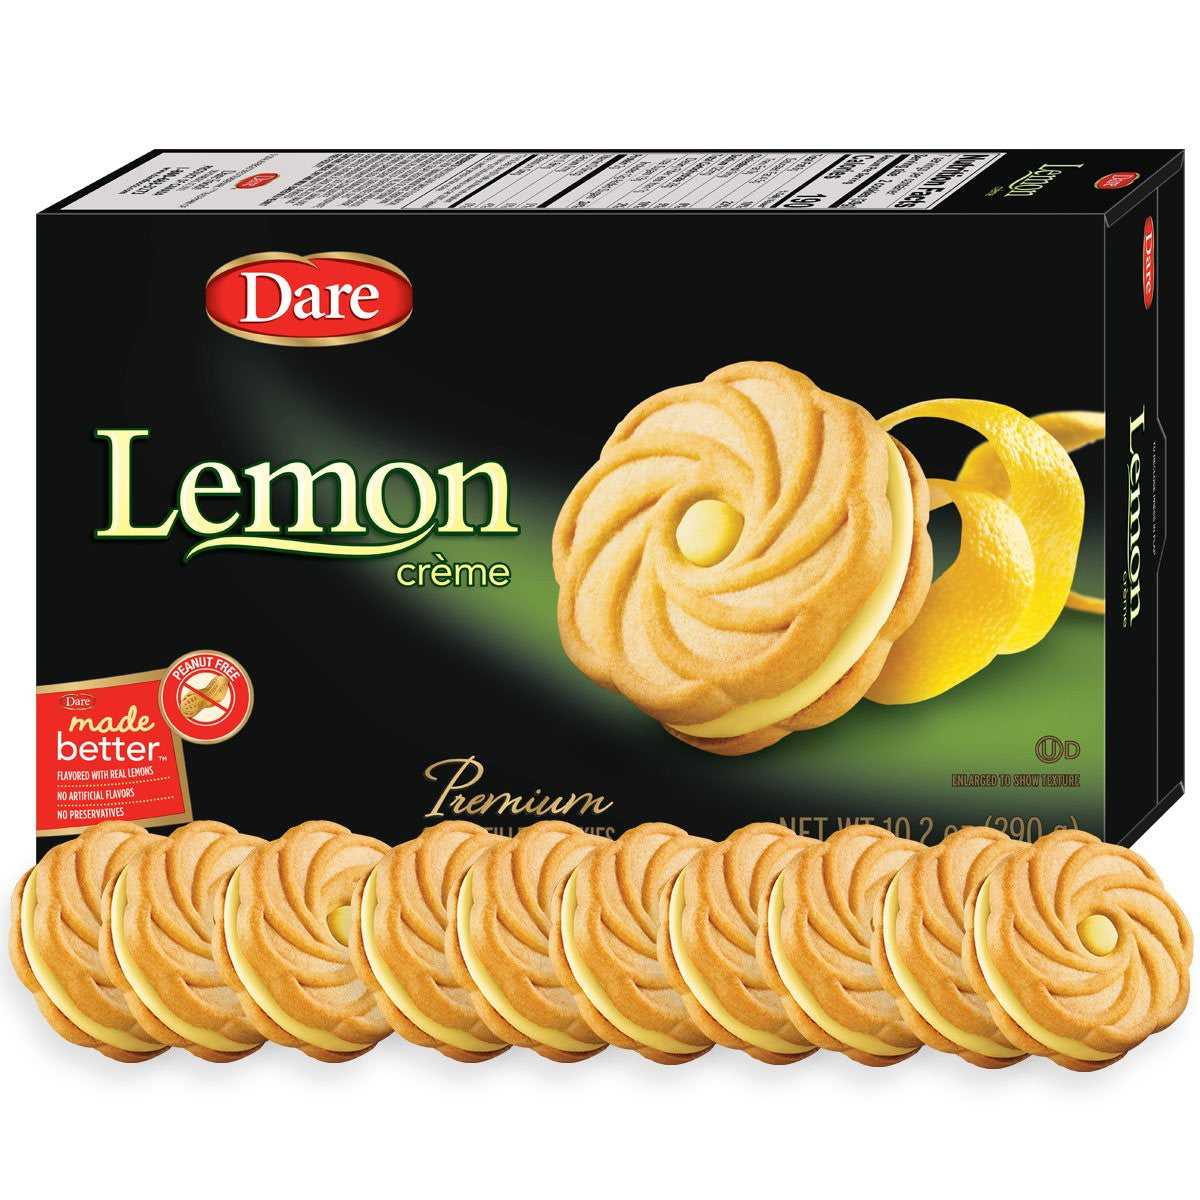 Dare Lemon Creme Filled Cookies, 290g/10.2oz, 12 Pack, (Imported from Canada)